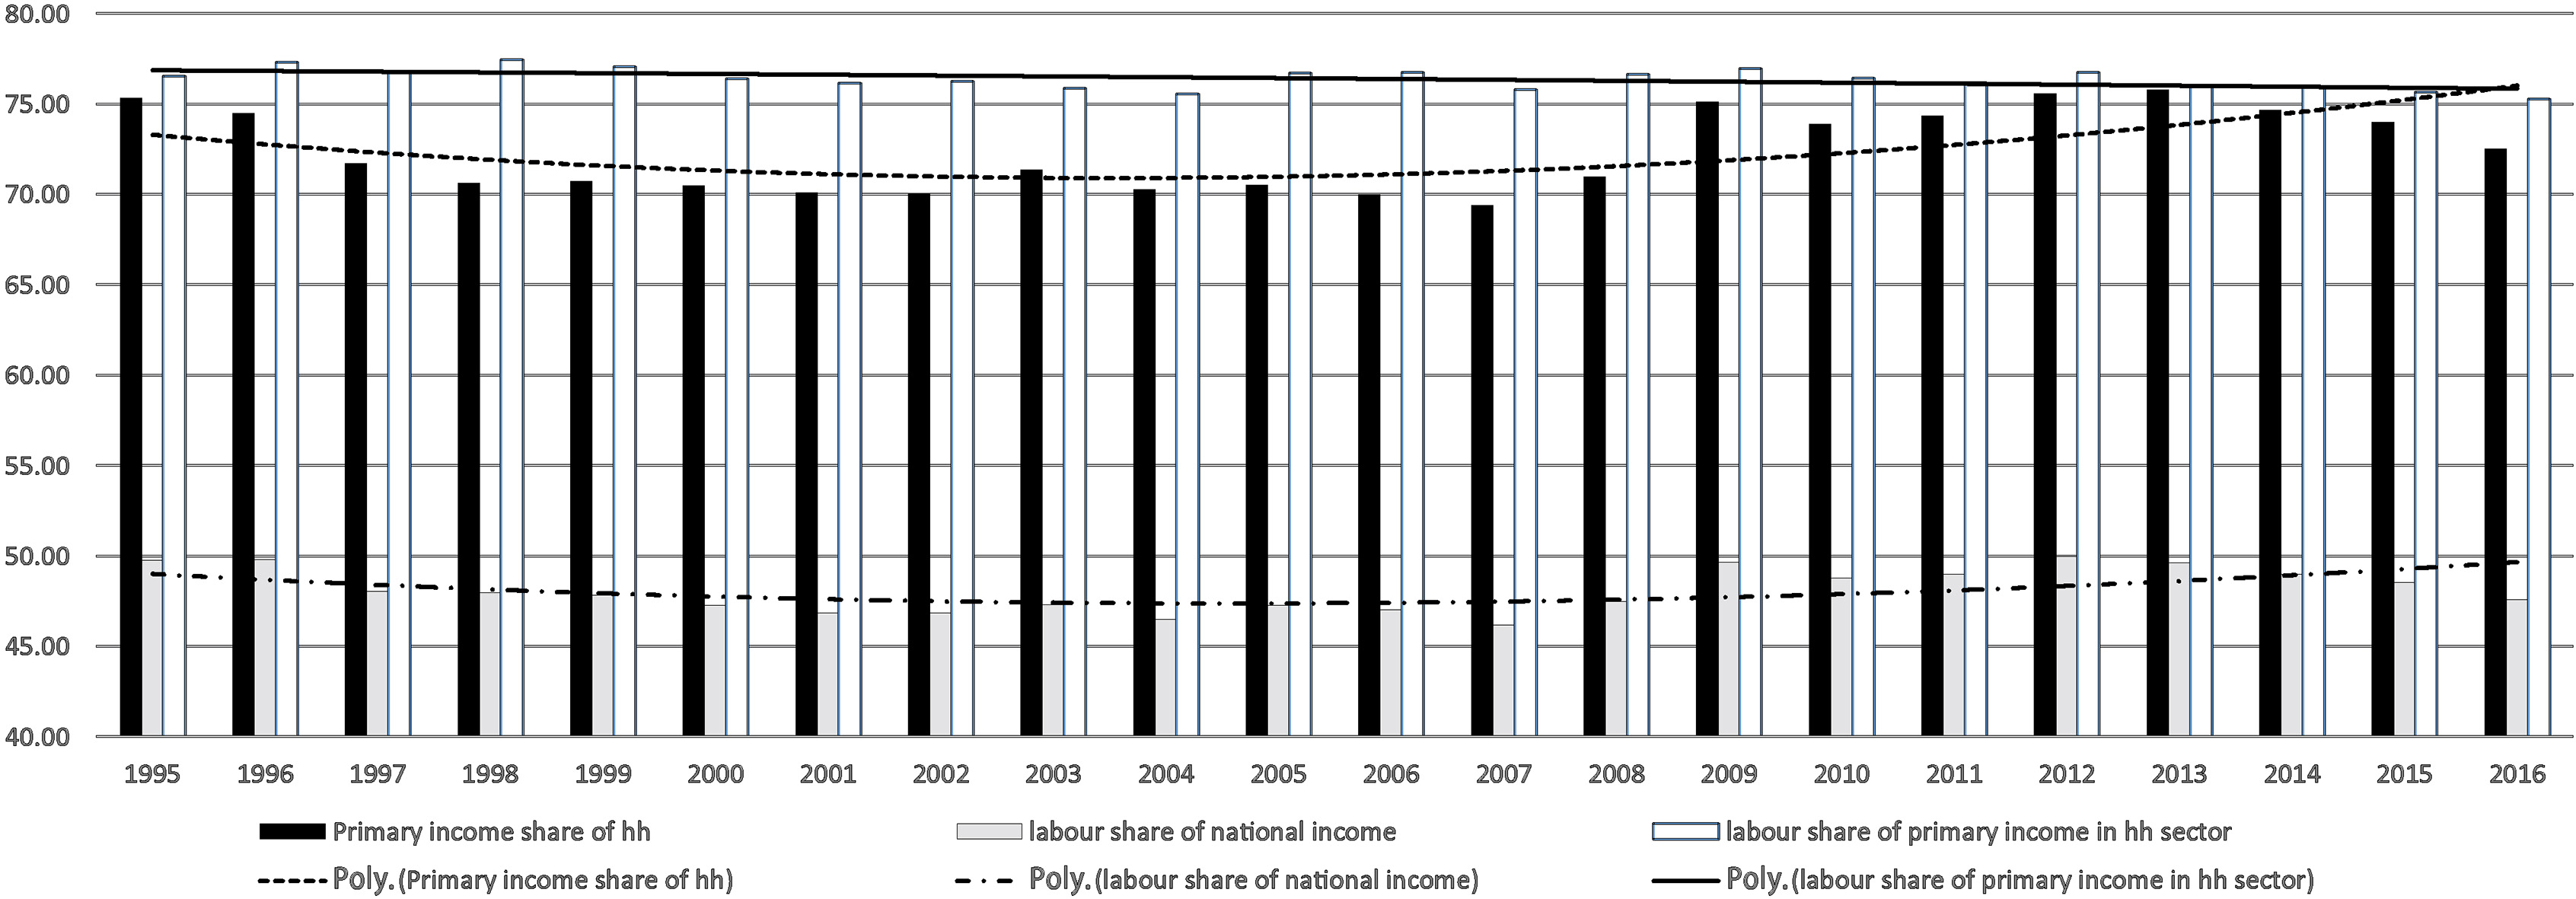 Primary income share of households, labour share (compensation of employees) of national income and the labour share of primary income. Source: Statistics Finland and author’s calculations.